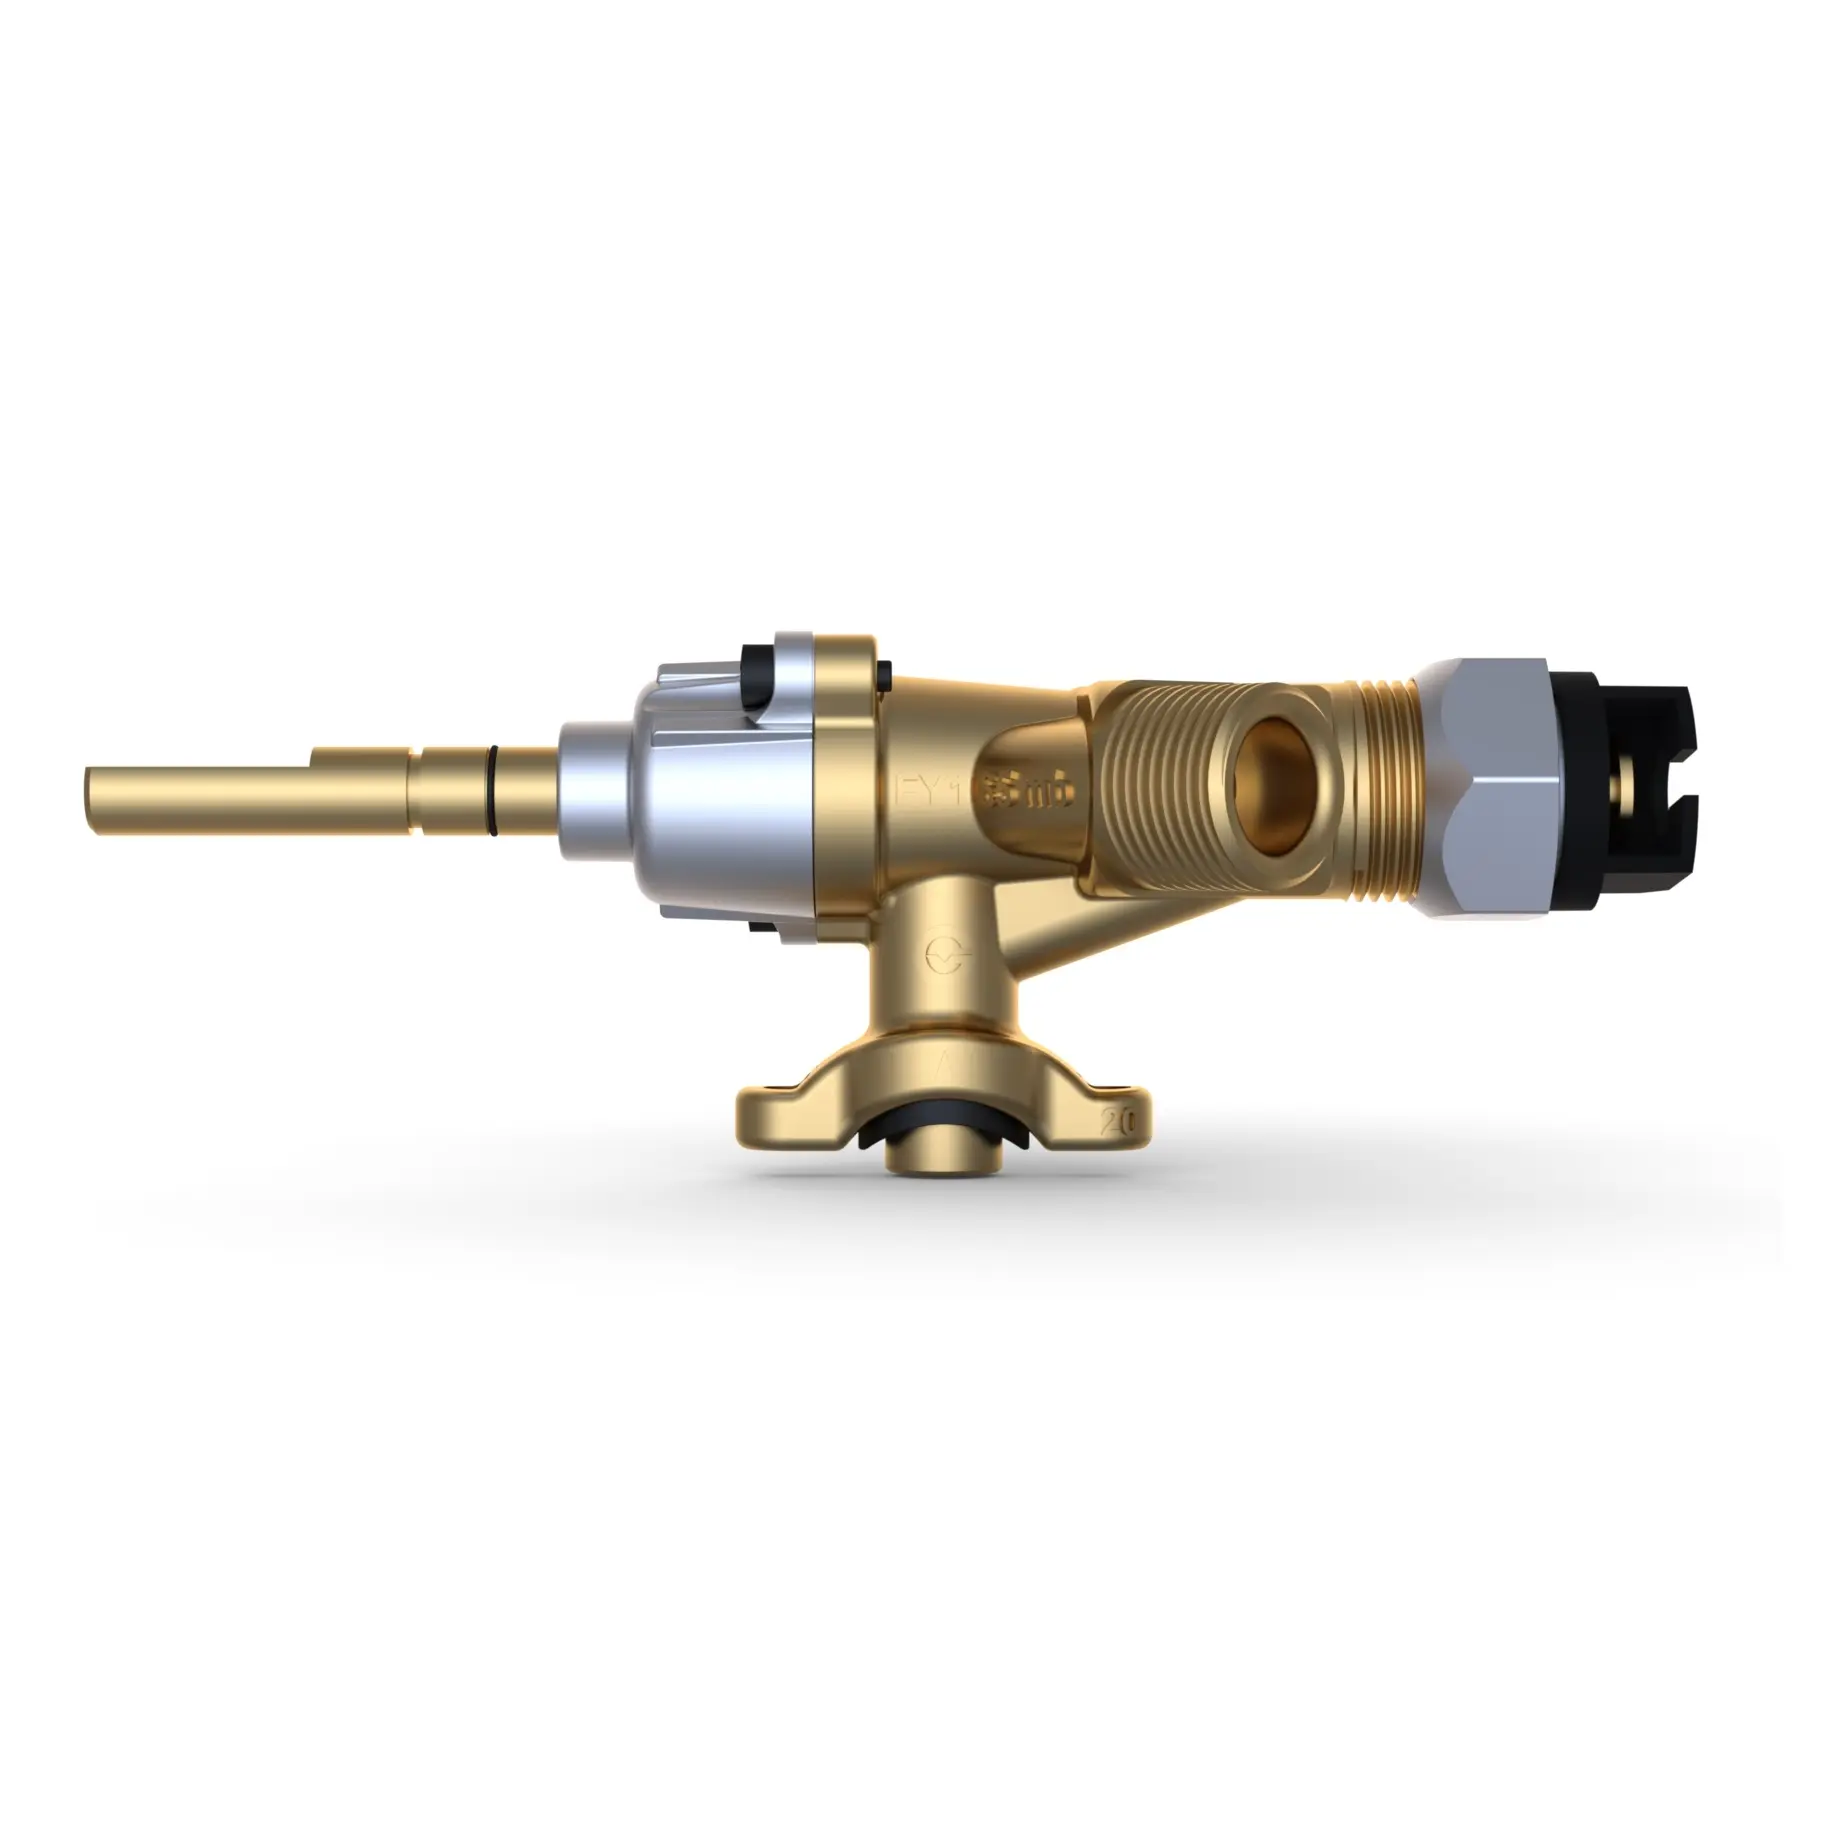 Safety Double Outlet Oven Valves Premium Gas Stove Valve Available LPG - NG Brass Material Valves For Cooker Oven Stove